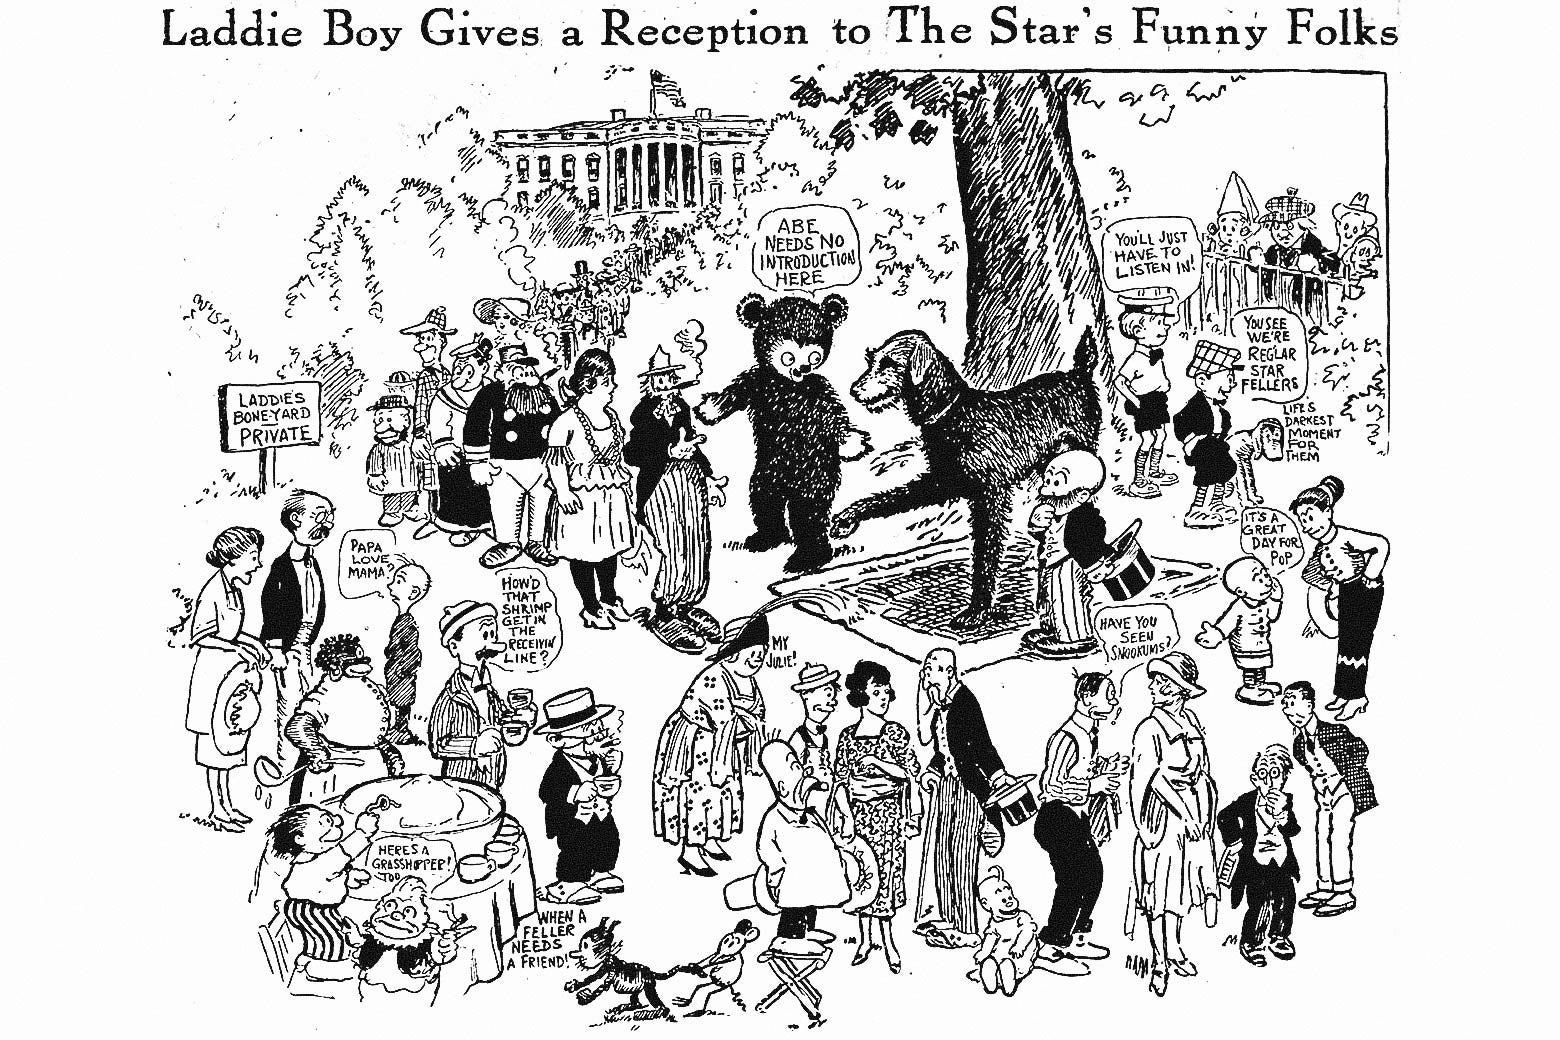 A drawing showing Laddie Boy shaking hands with a variety of 1920s comic strip characters.